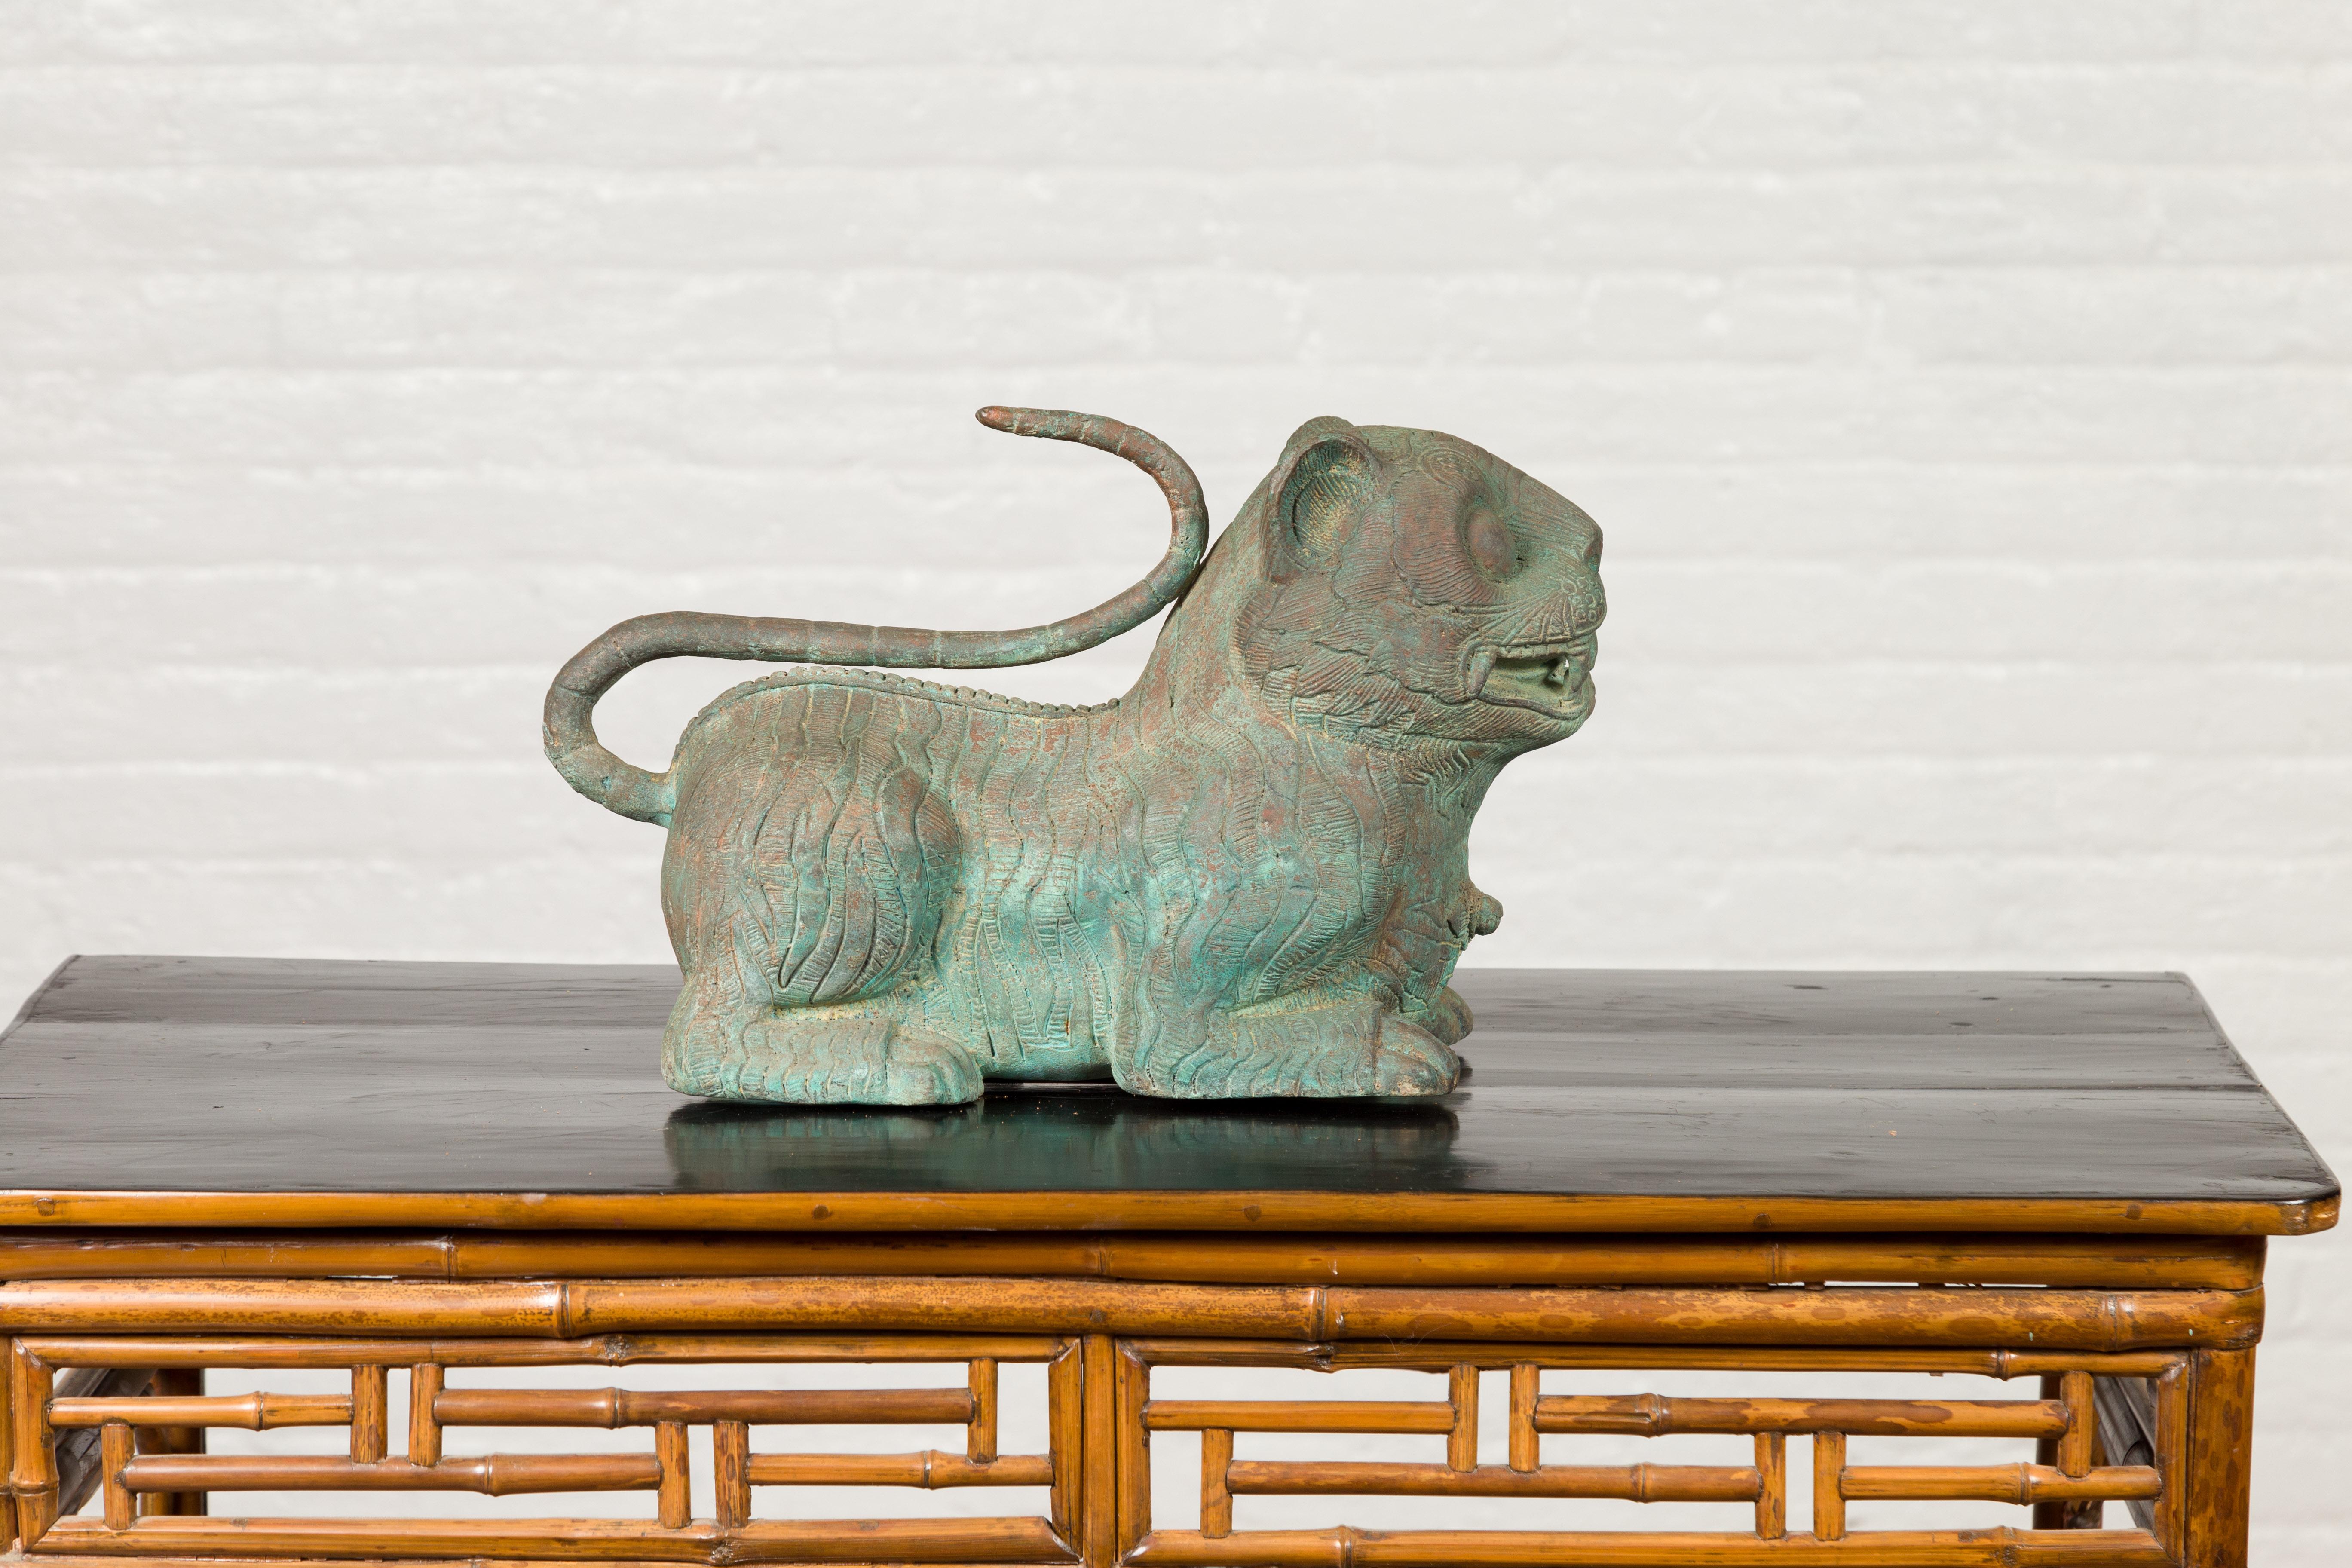 A vintage cast bronze mythical animal sculpture from the mid-20th century, with verde patina. Created with the traditional technique of the lost-wax (à la cire perdue) that allows a great precision and finesse in the details, this bronze sculpture